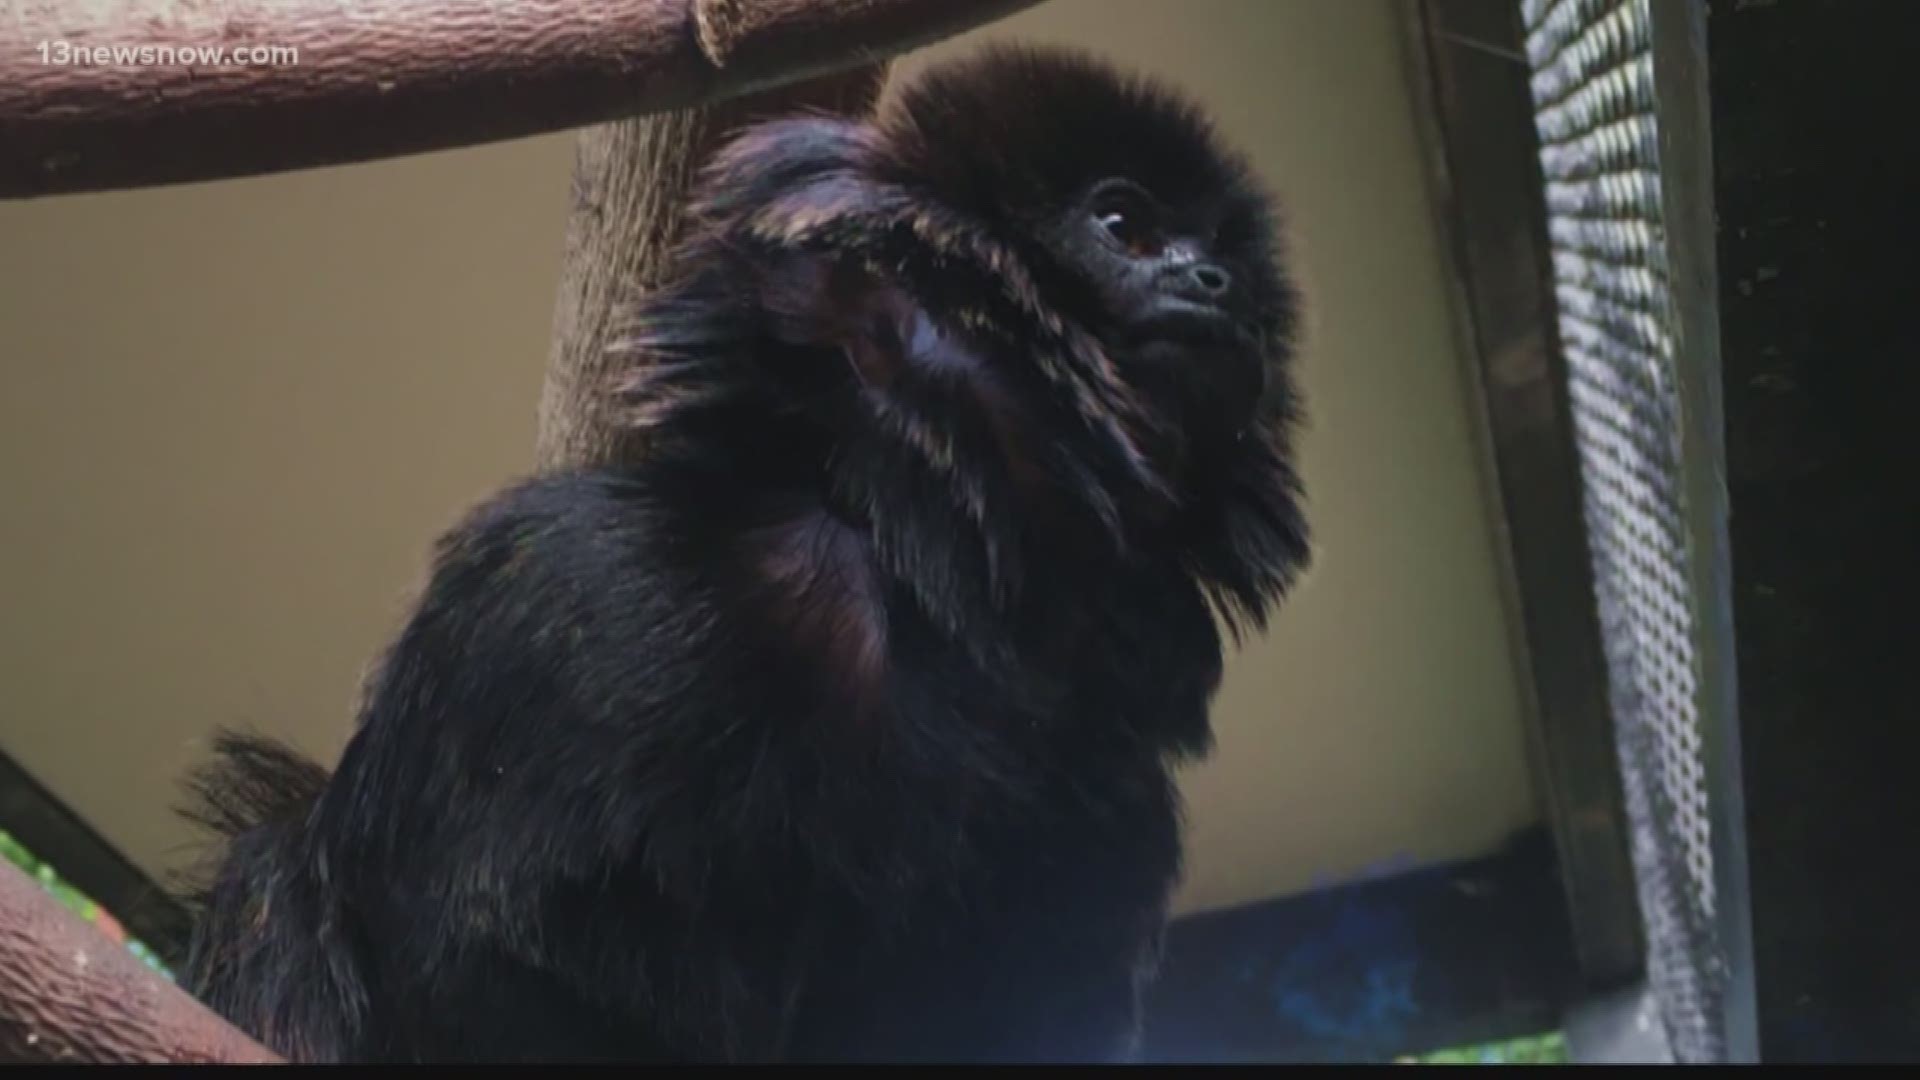 Kali, the 12-year-old rare Goeldi's monkey reported stolen from the Palm Beach Zoo, has been found safe and sound.